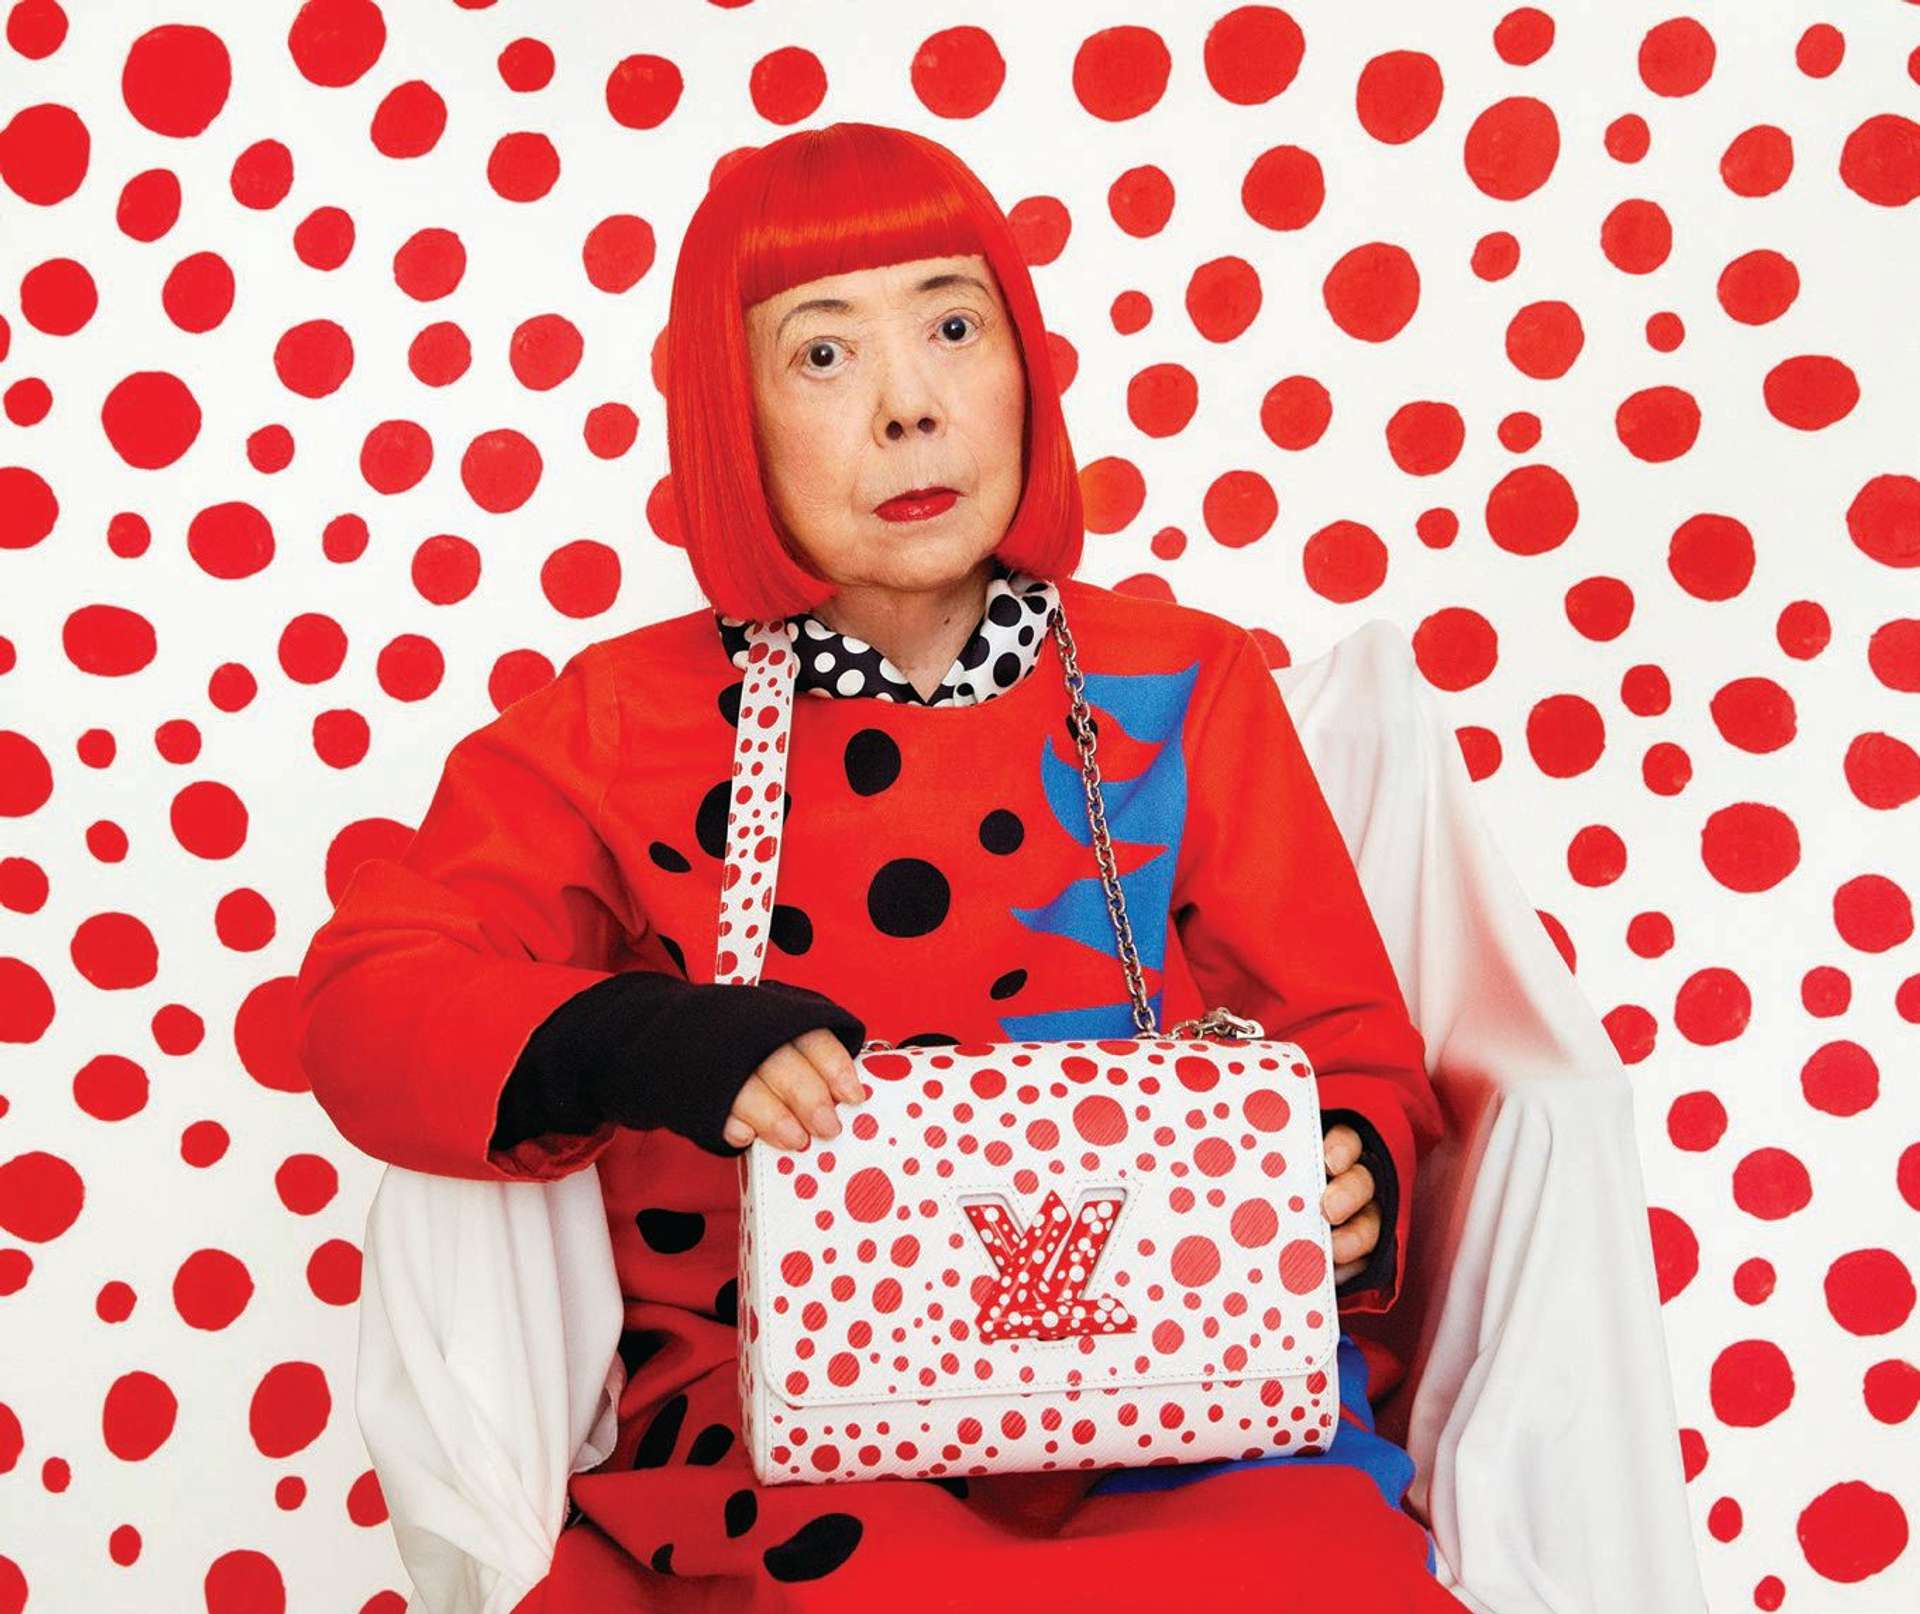 An image of artist Yayoi Kusama, wearing red, holding one of the bags she designed in collaboration with Louis Vuitton.